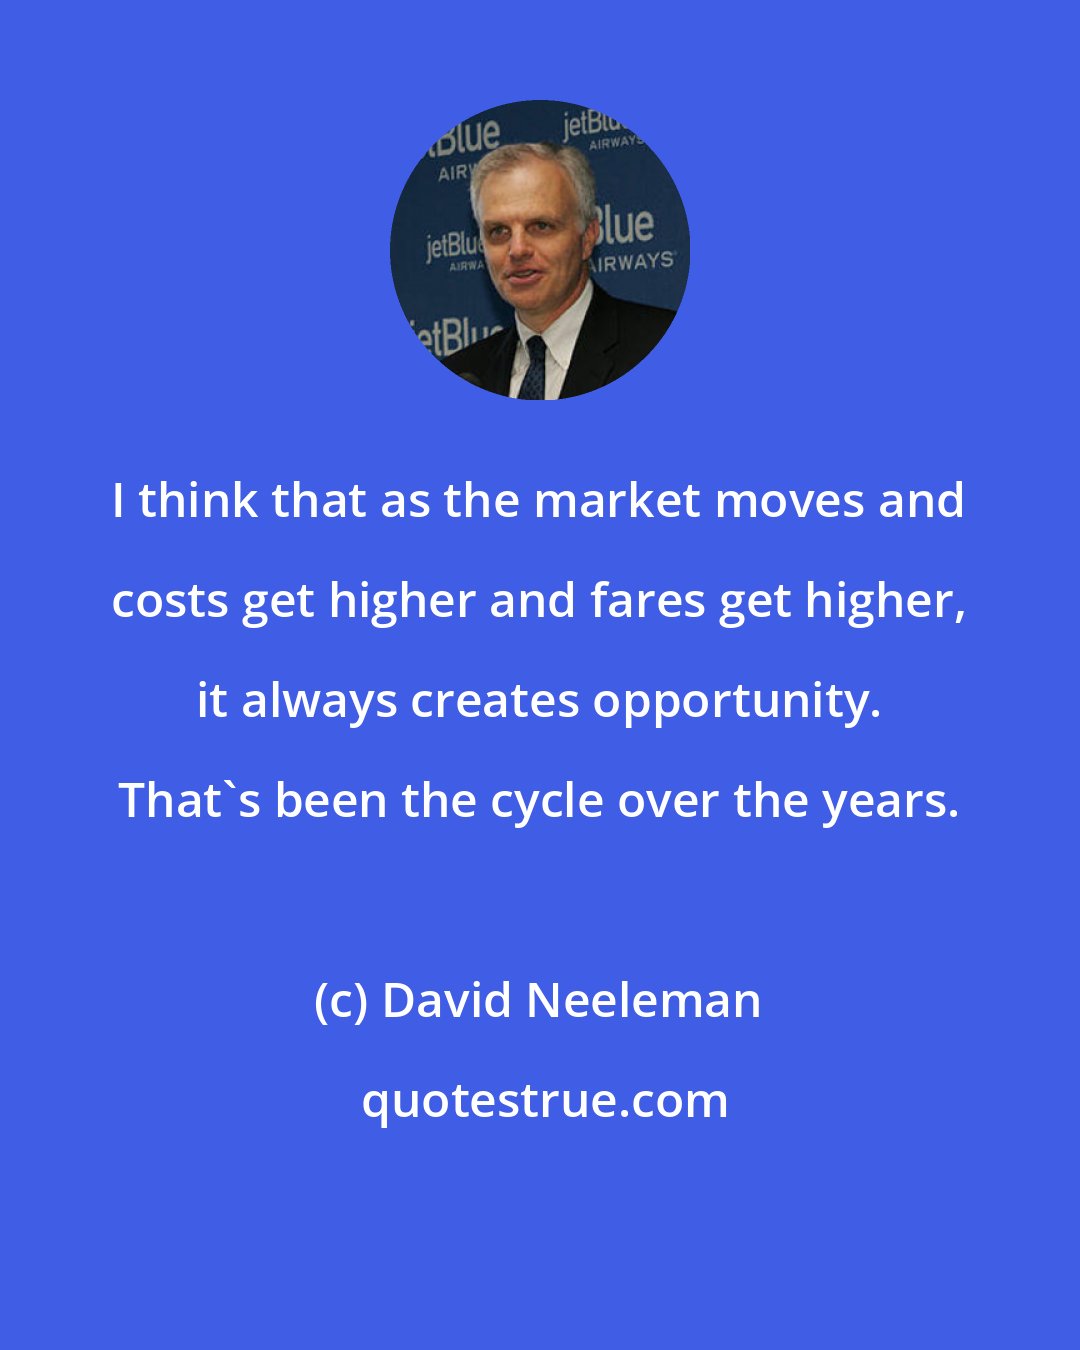 David Neeleman: I think that as the market moves and costs get higher and fares get higher, it always creates opportunity. That's been the cycle over the years.